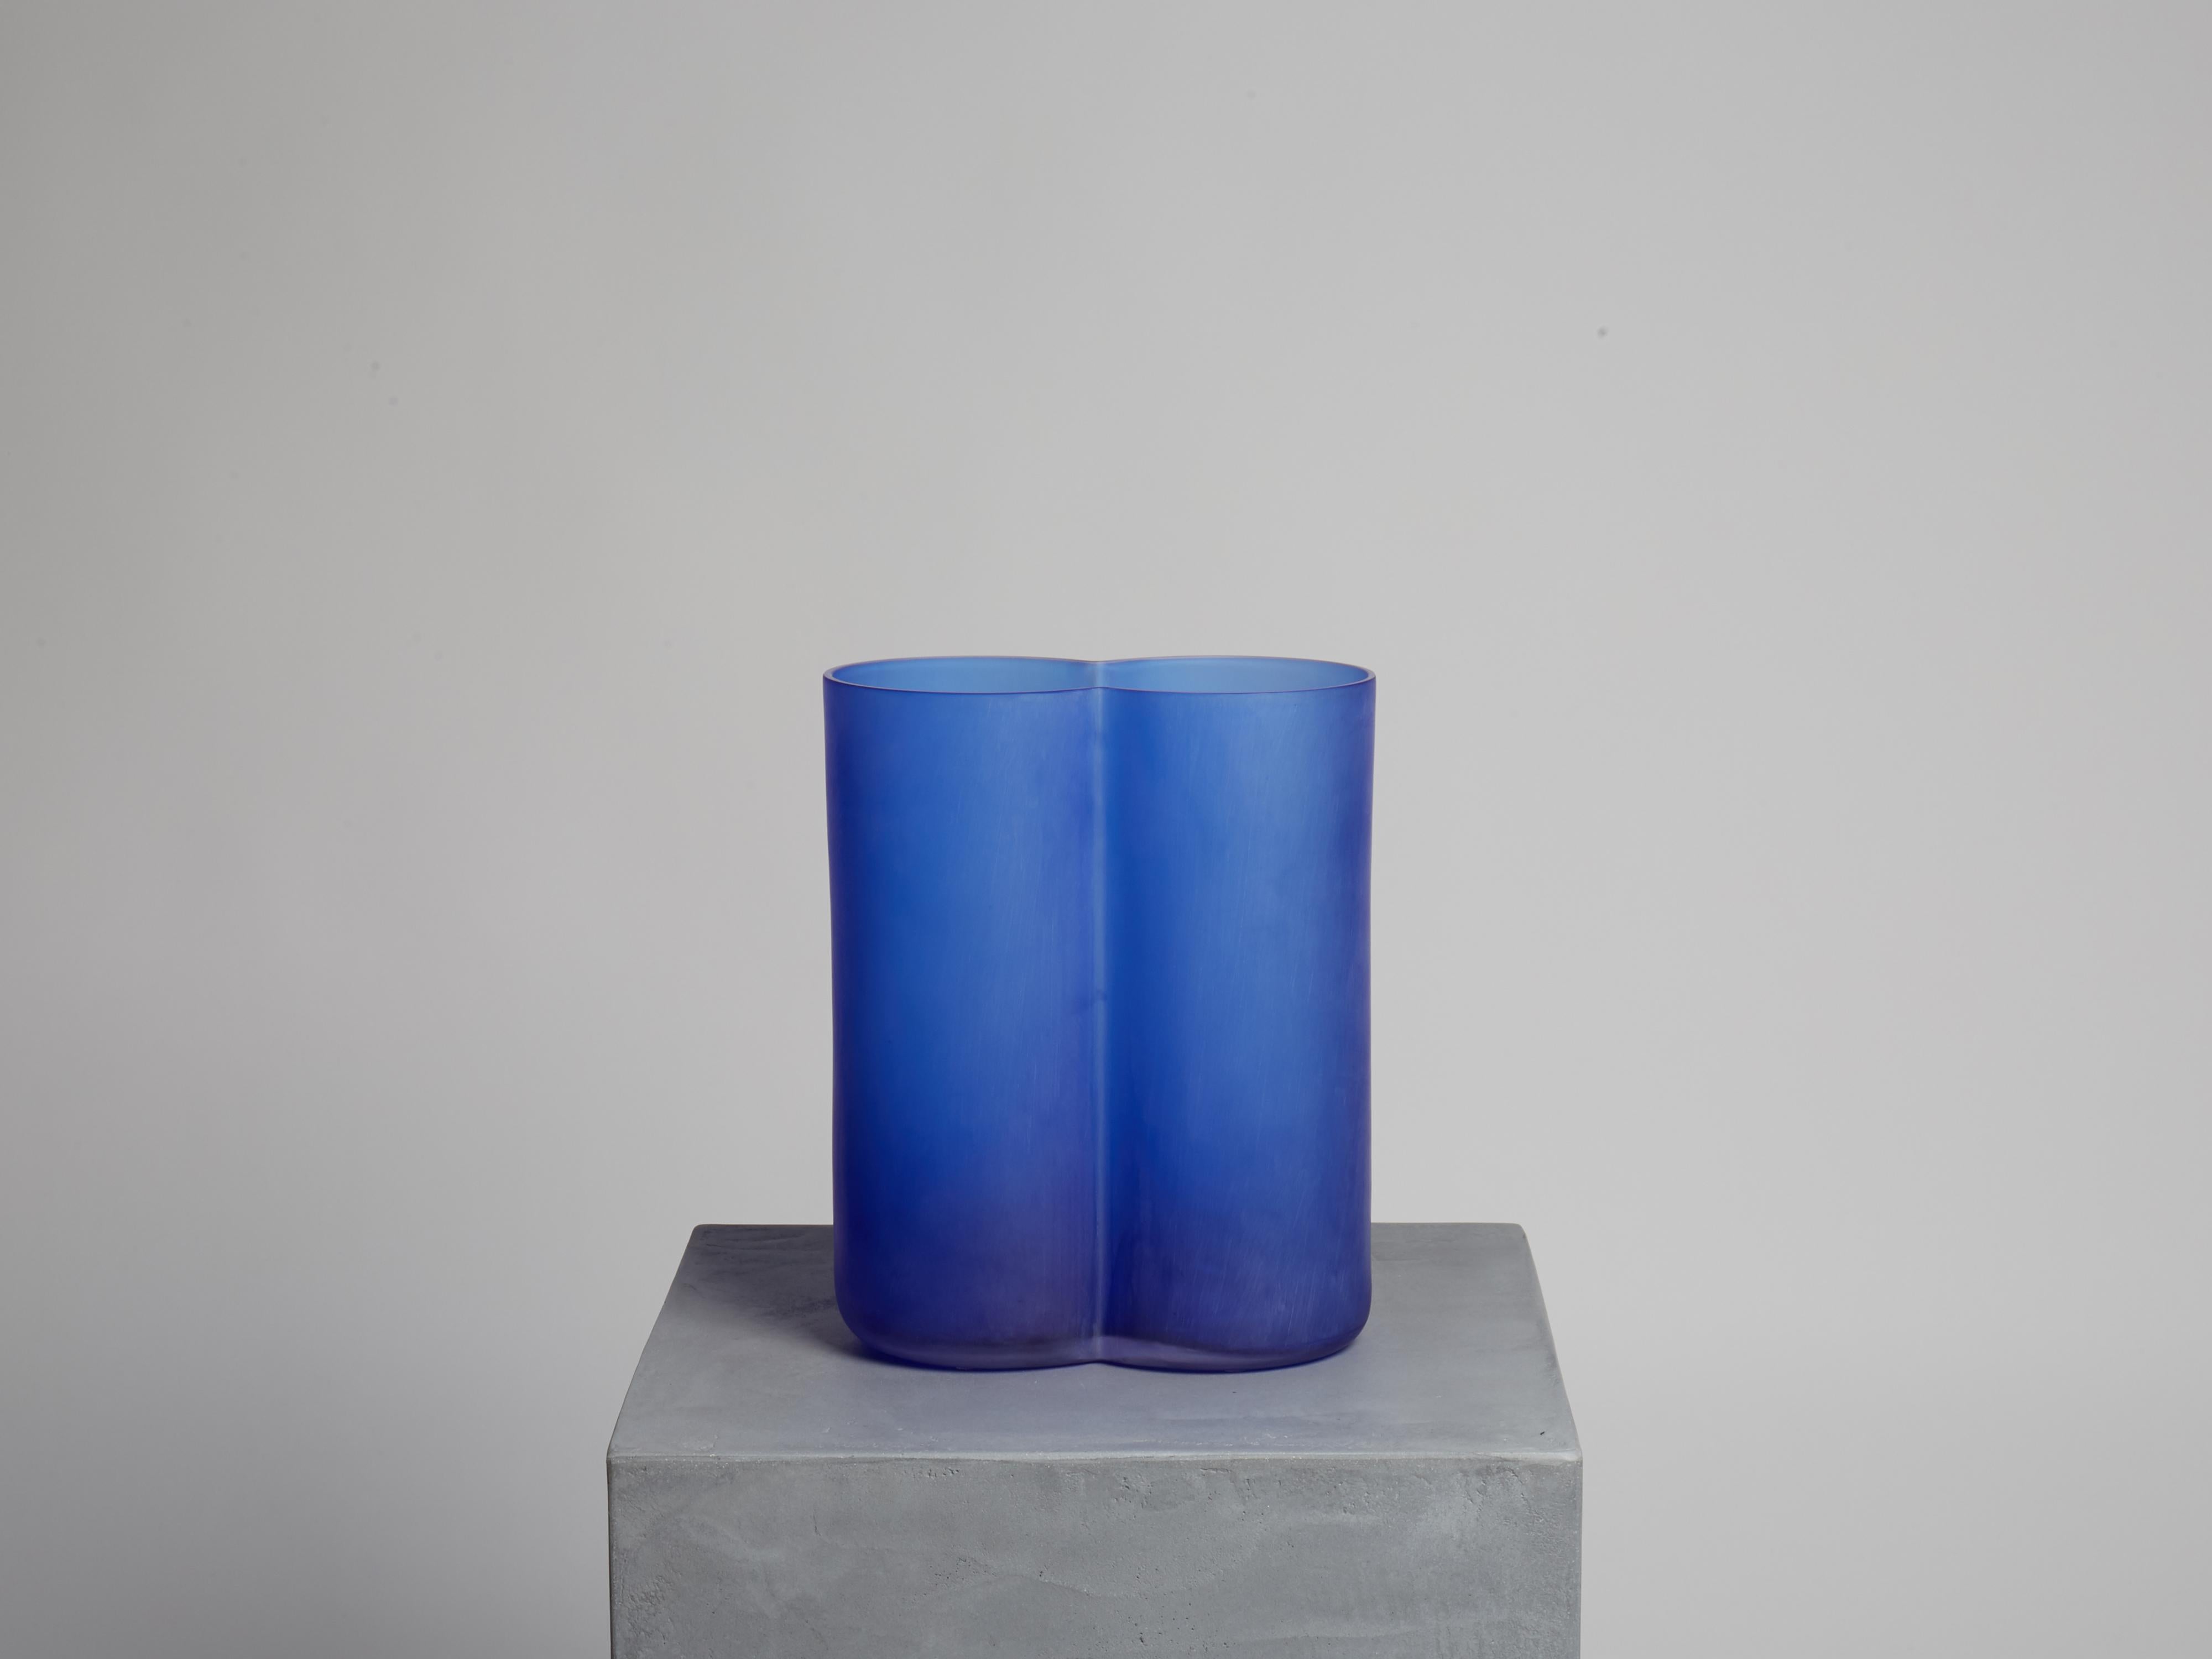 Materials: murano glass, satin finish

Colours: cobalt blue; also available in emerald green or ochre yellow

In January 2017 Calori & Maillard took part to Art City, an event linked to Arte Fiera, with the solo show “Causerie – conversation”